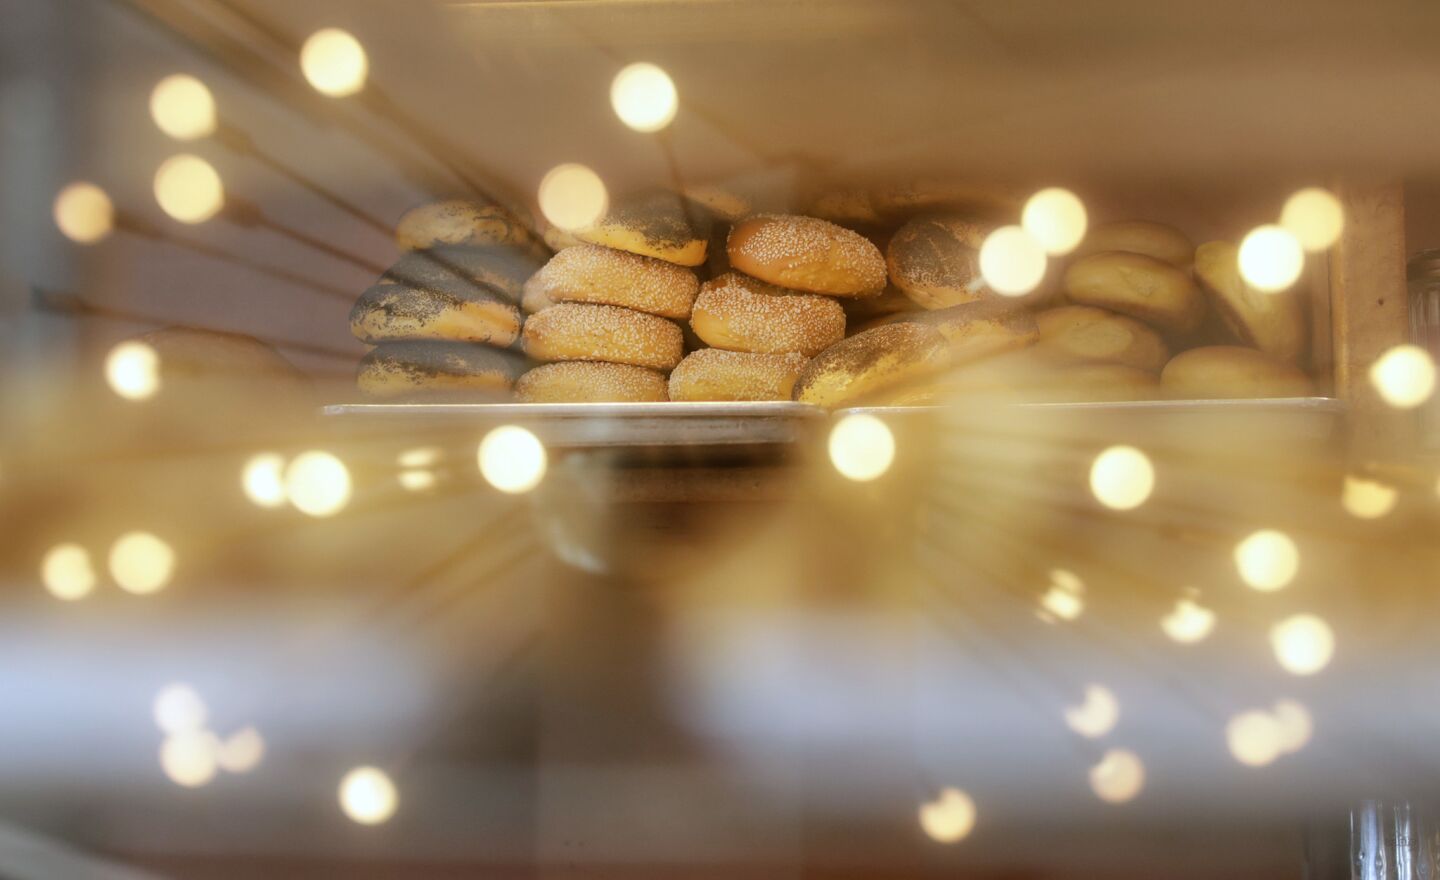 A vintage light is reflected in a display of bagels at Canter's.